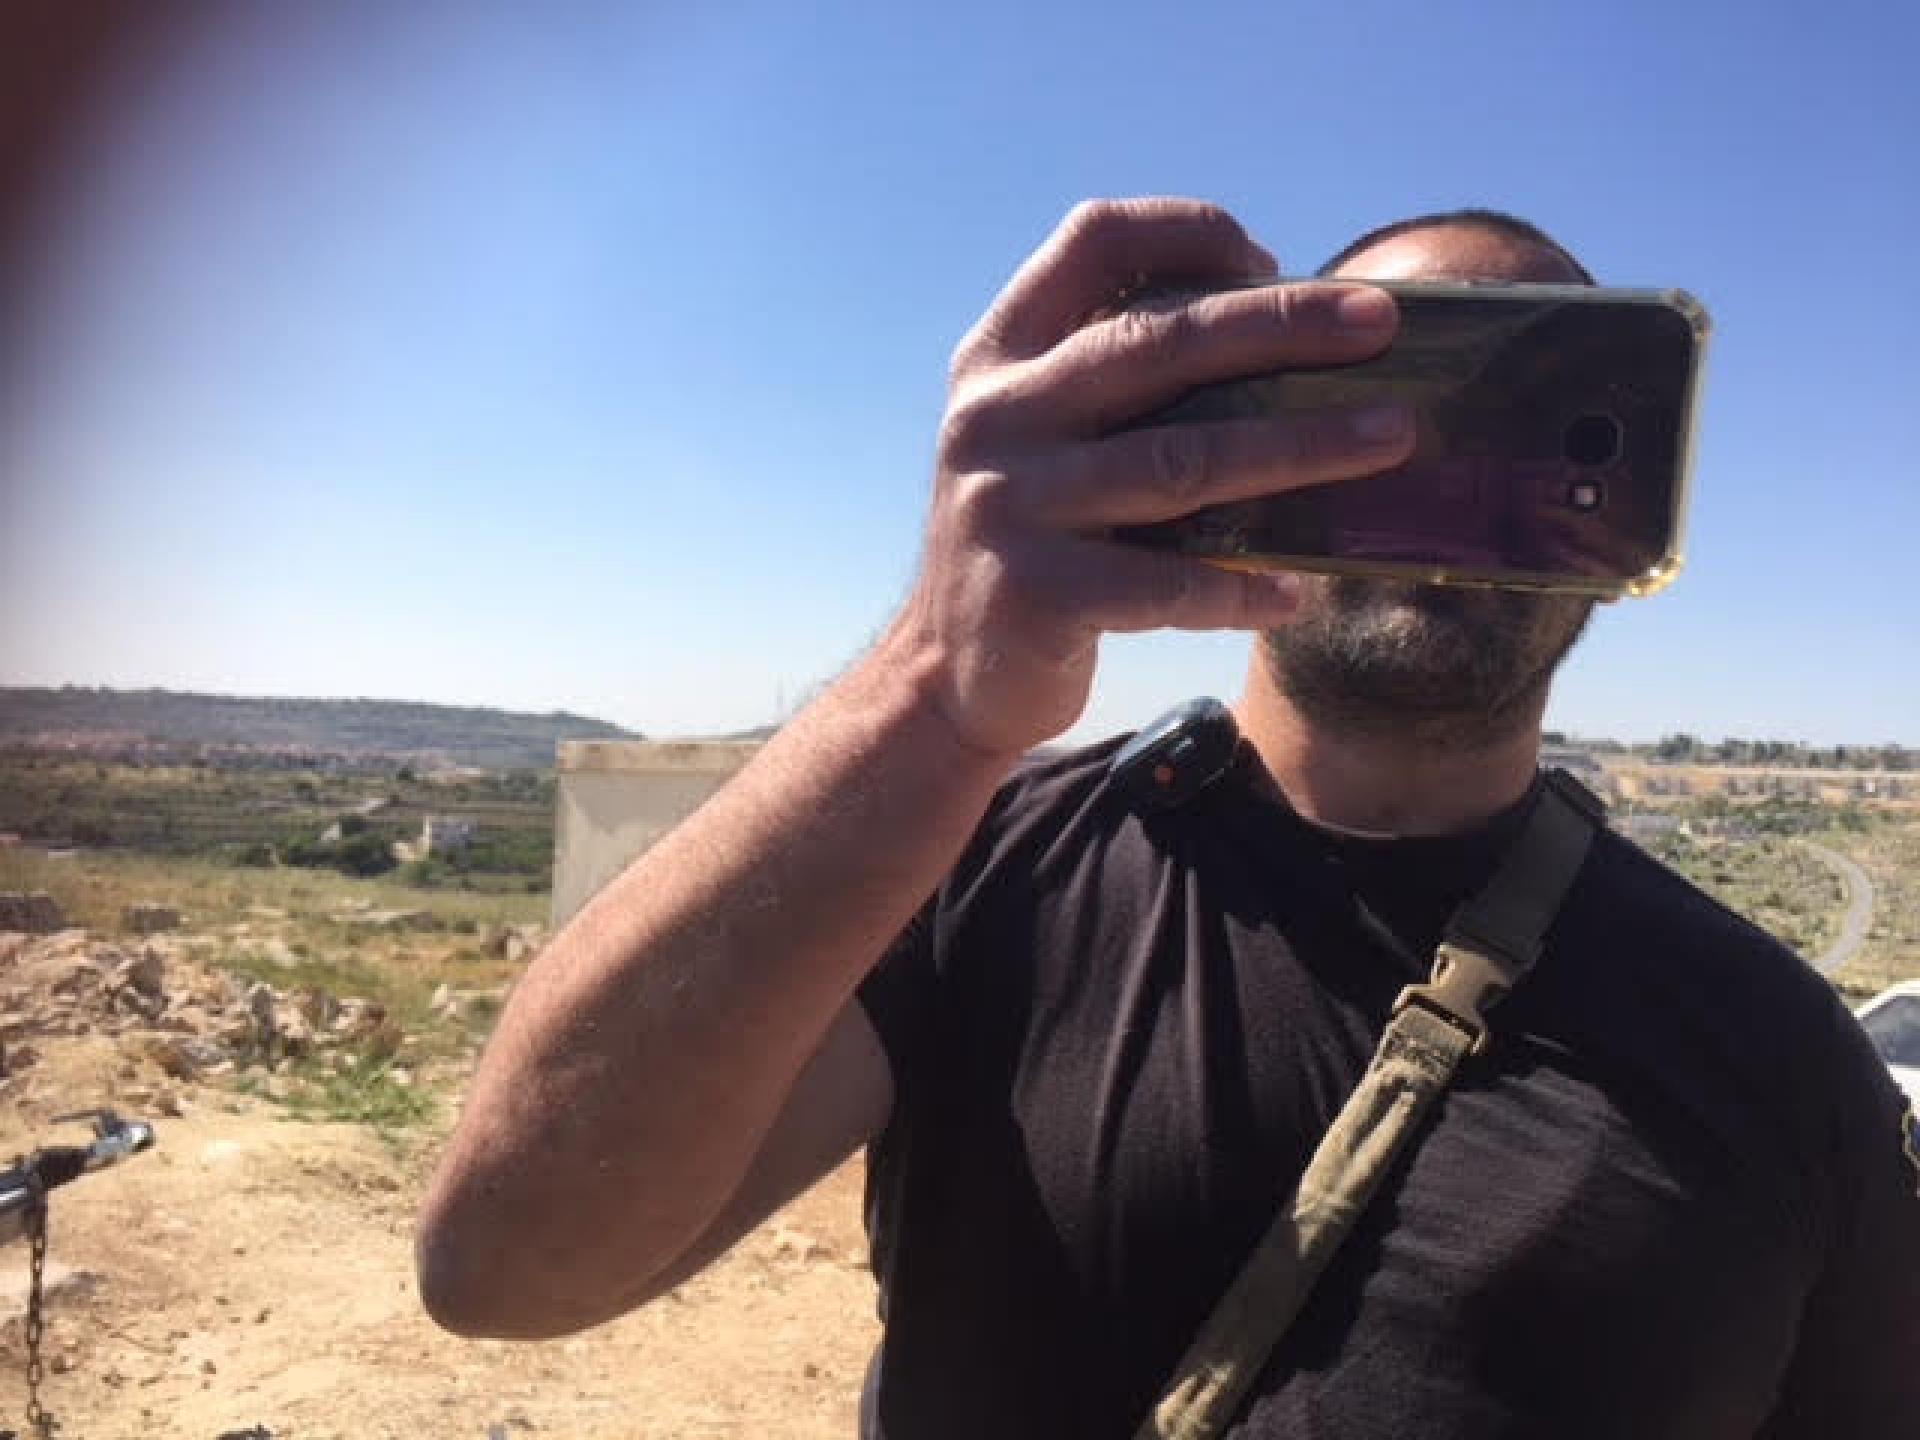 We ran into Moshe, Kiryat Arba’s security official. He officiated and took photos, we photographed right back